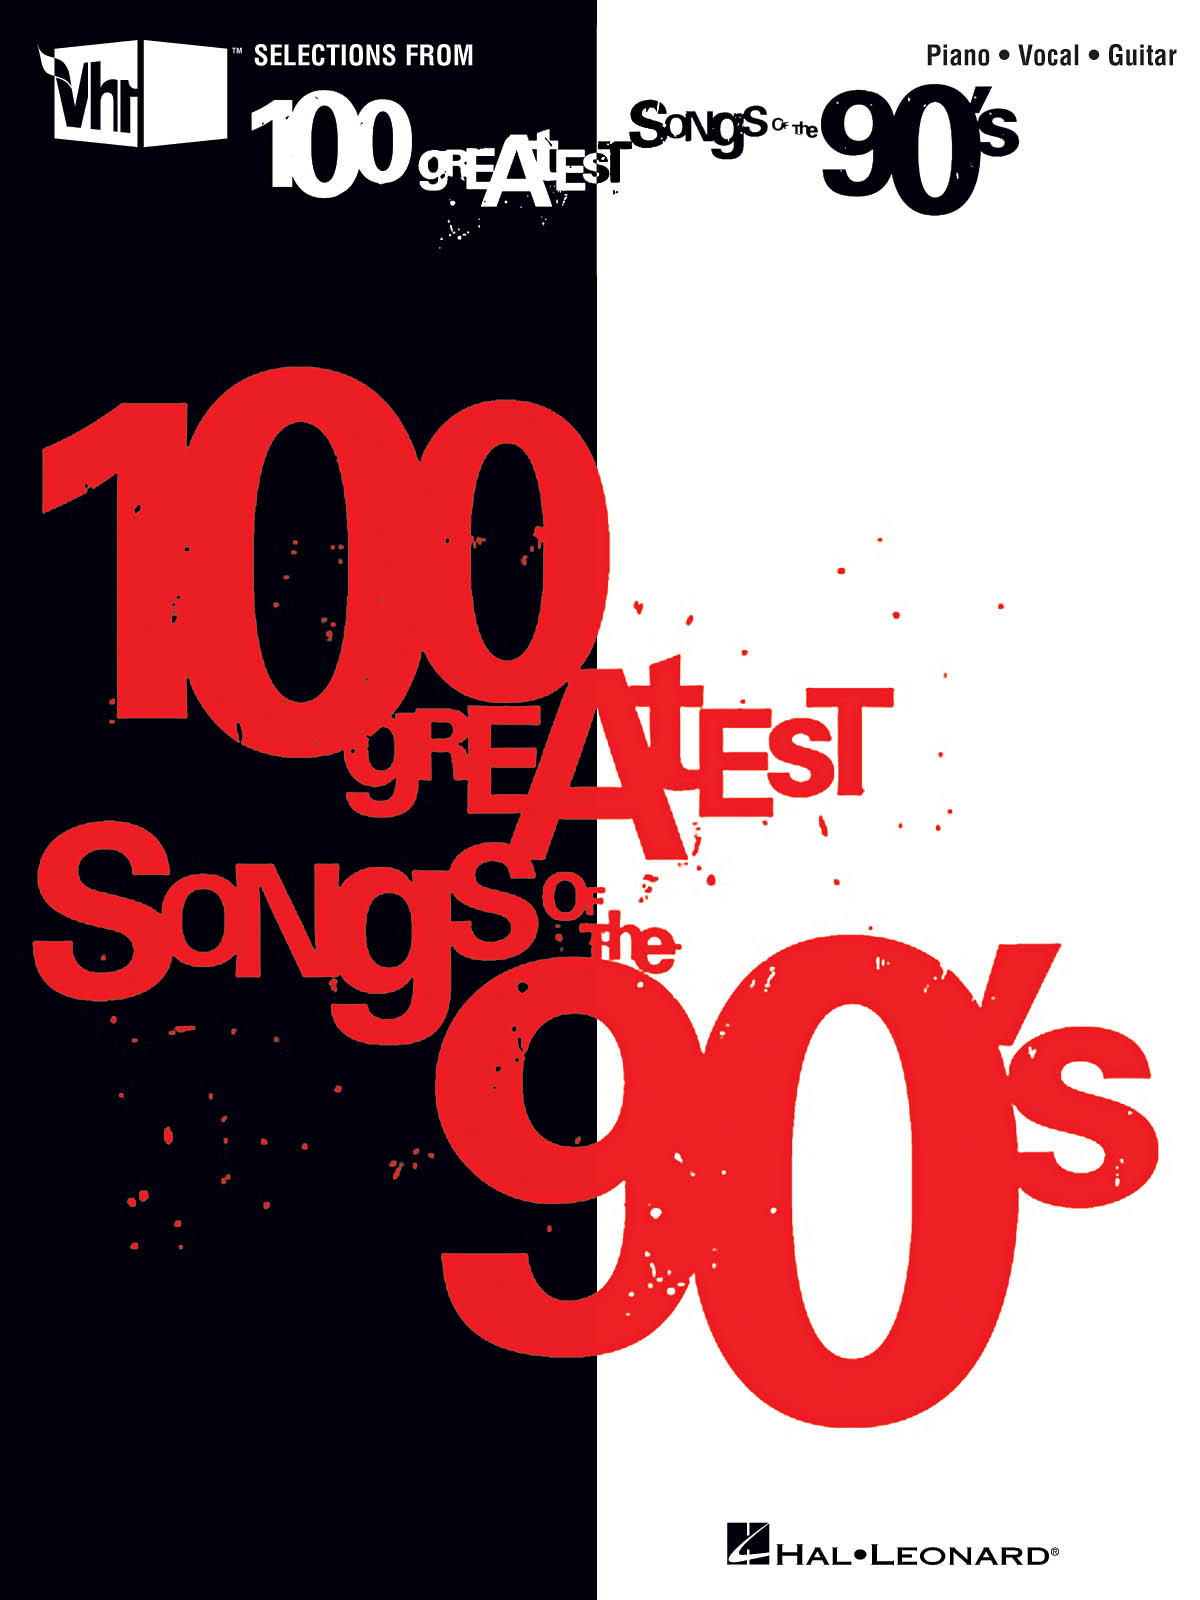 VH1's 100 Greatest Songs of the '90s: Piano  Vocal and Guitar: Mixed Songbook